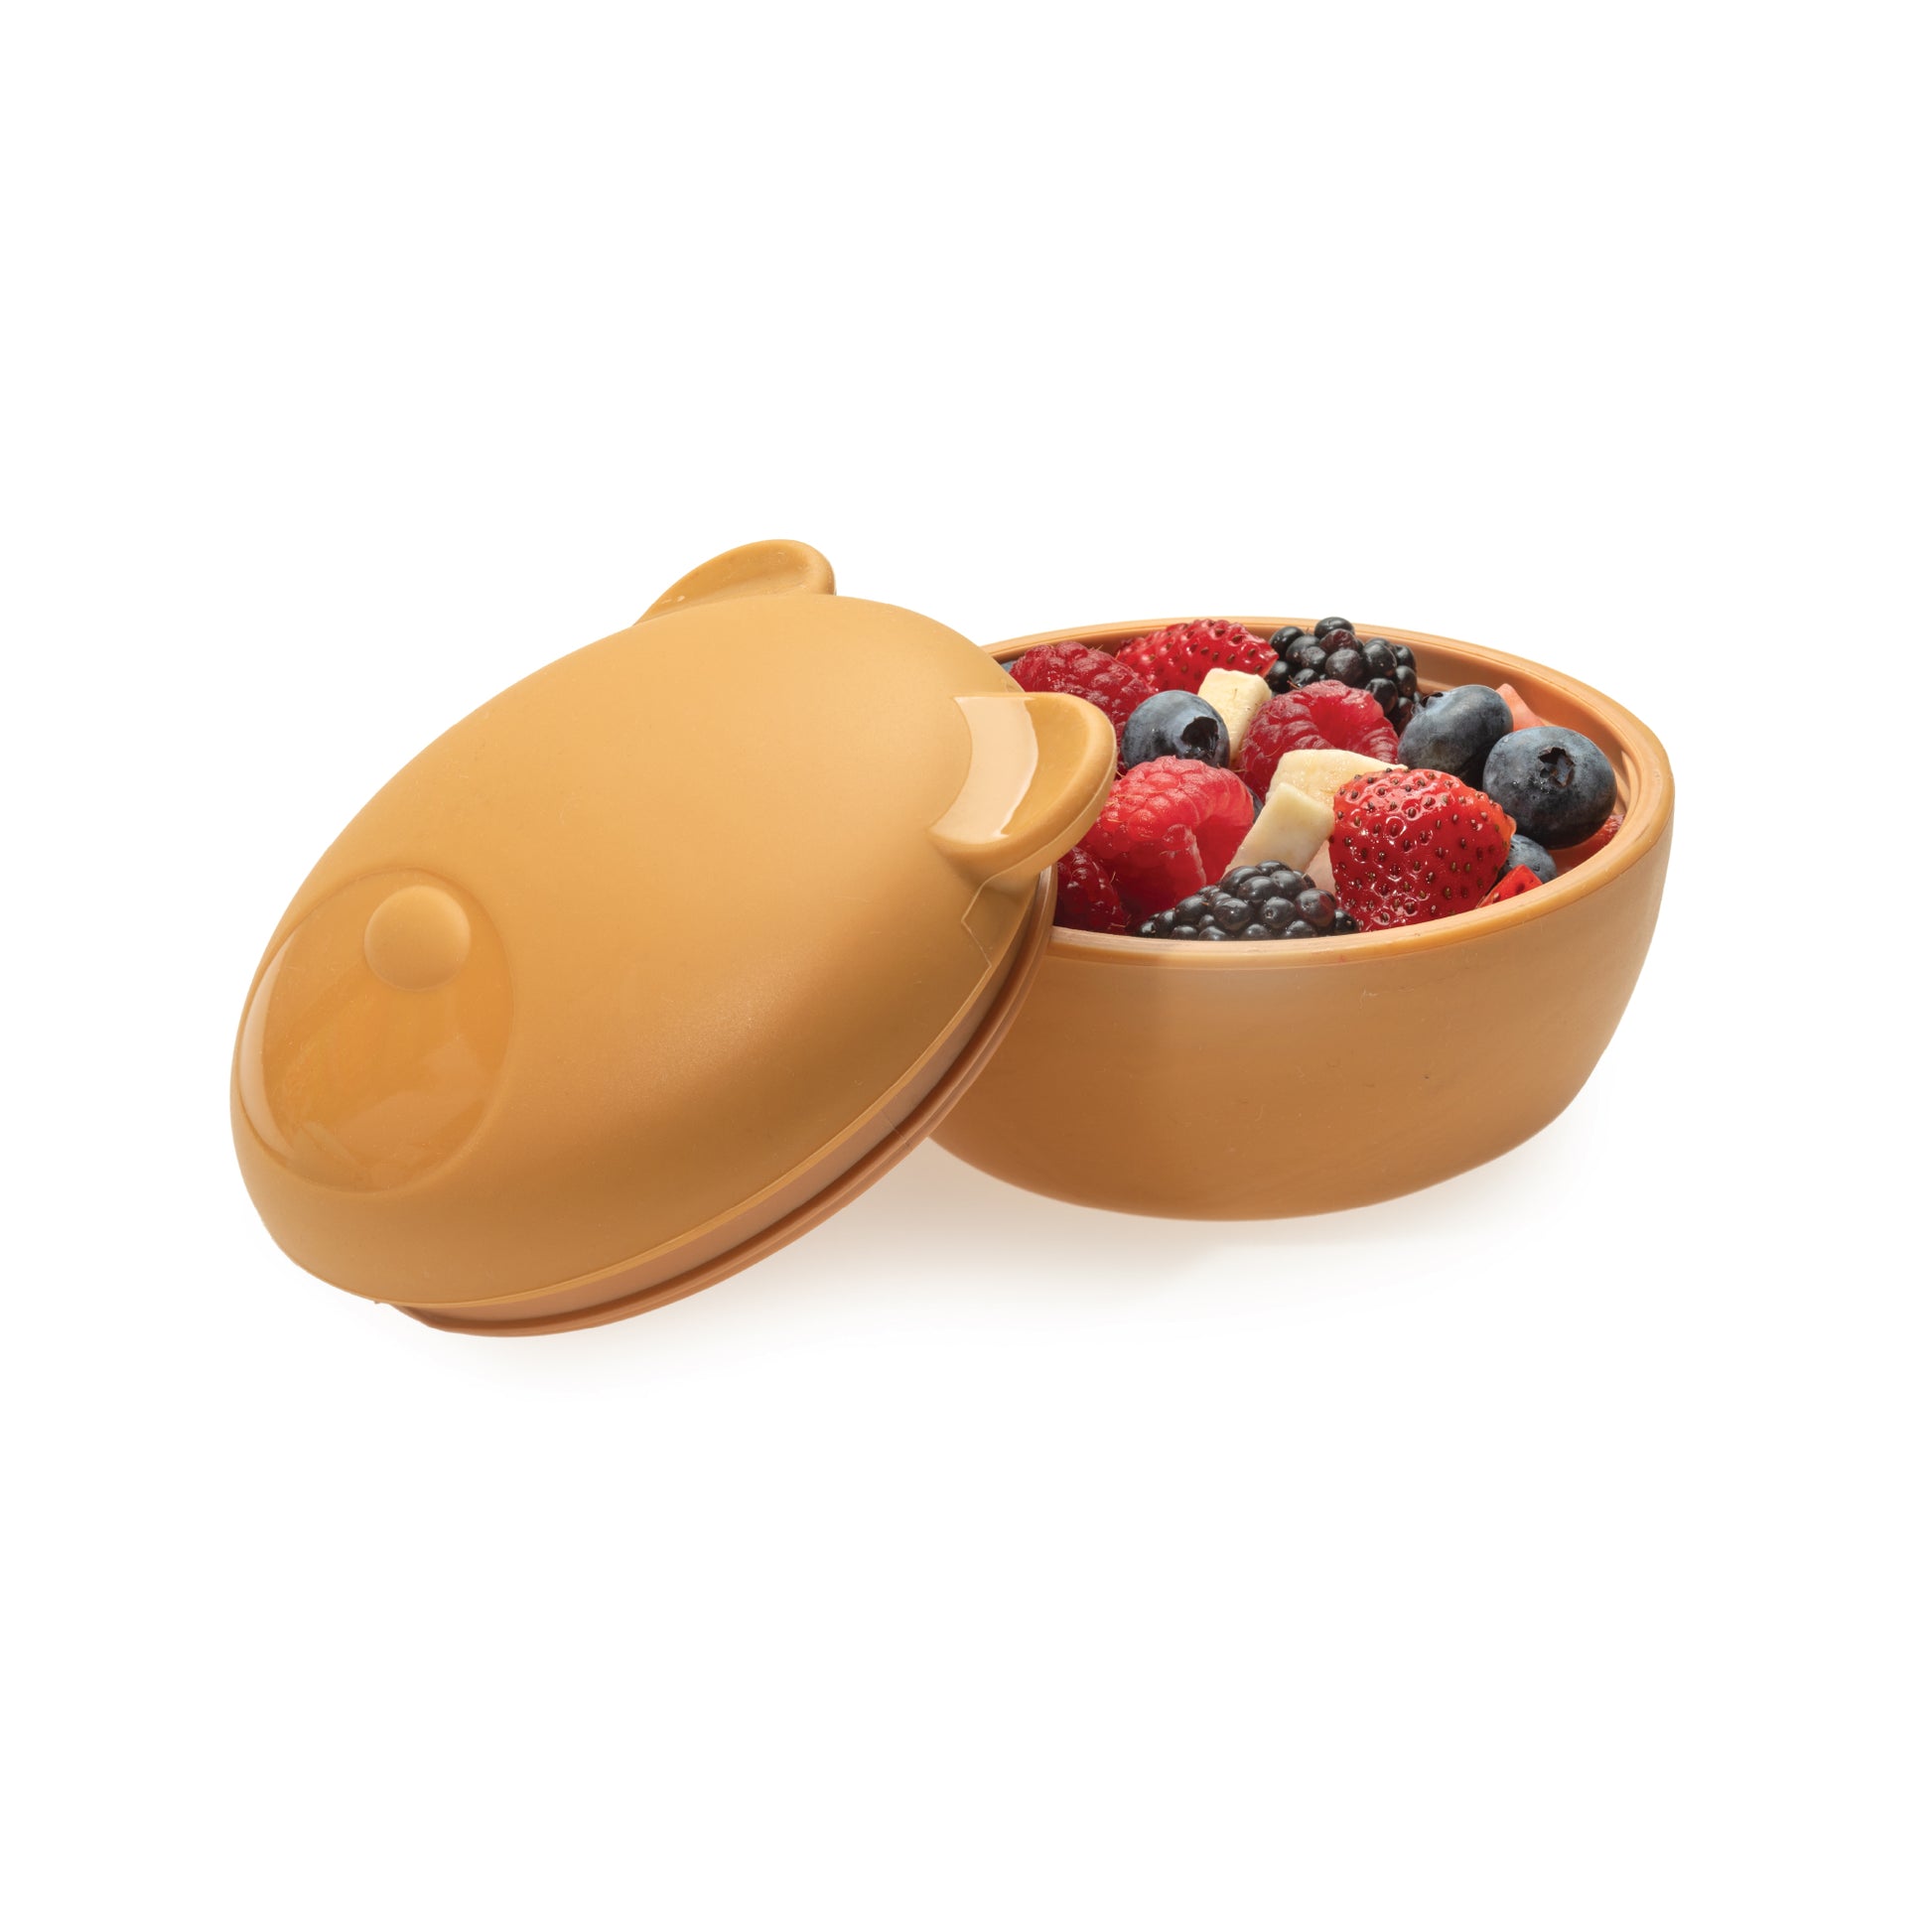 Melii Silicone Brown Bear Bowl with Lid 350 ml - Airtight & Leakproof Food Storage for Babies, Toddlers, Kids - BPA Free, Microwave Safe, Perfect for On-the-Go Meals Snacks